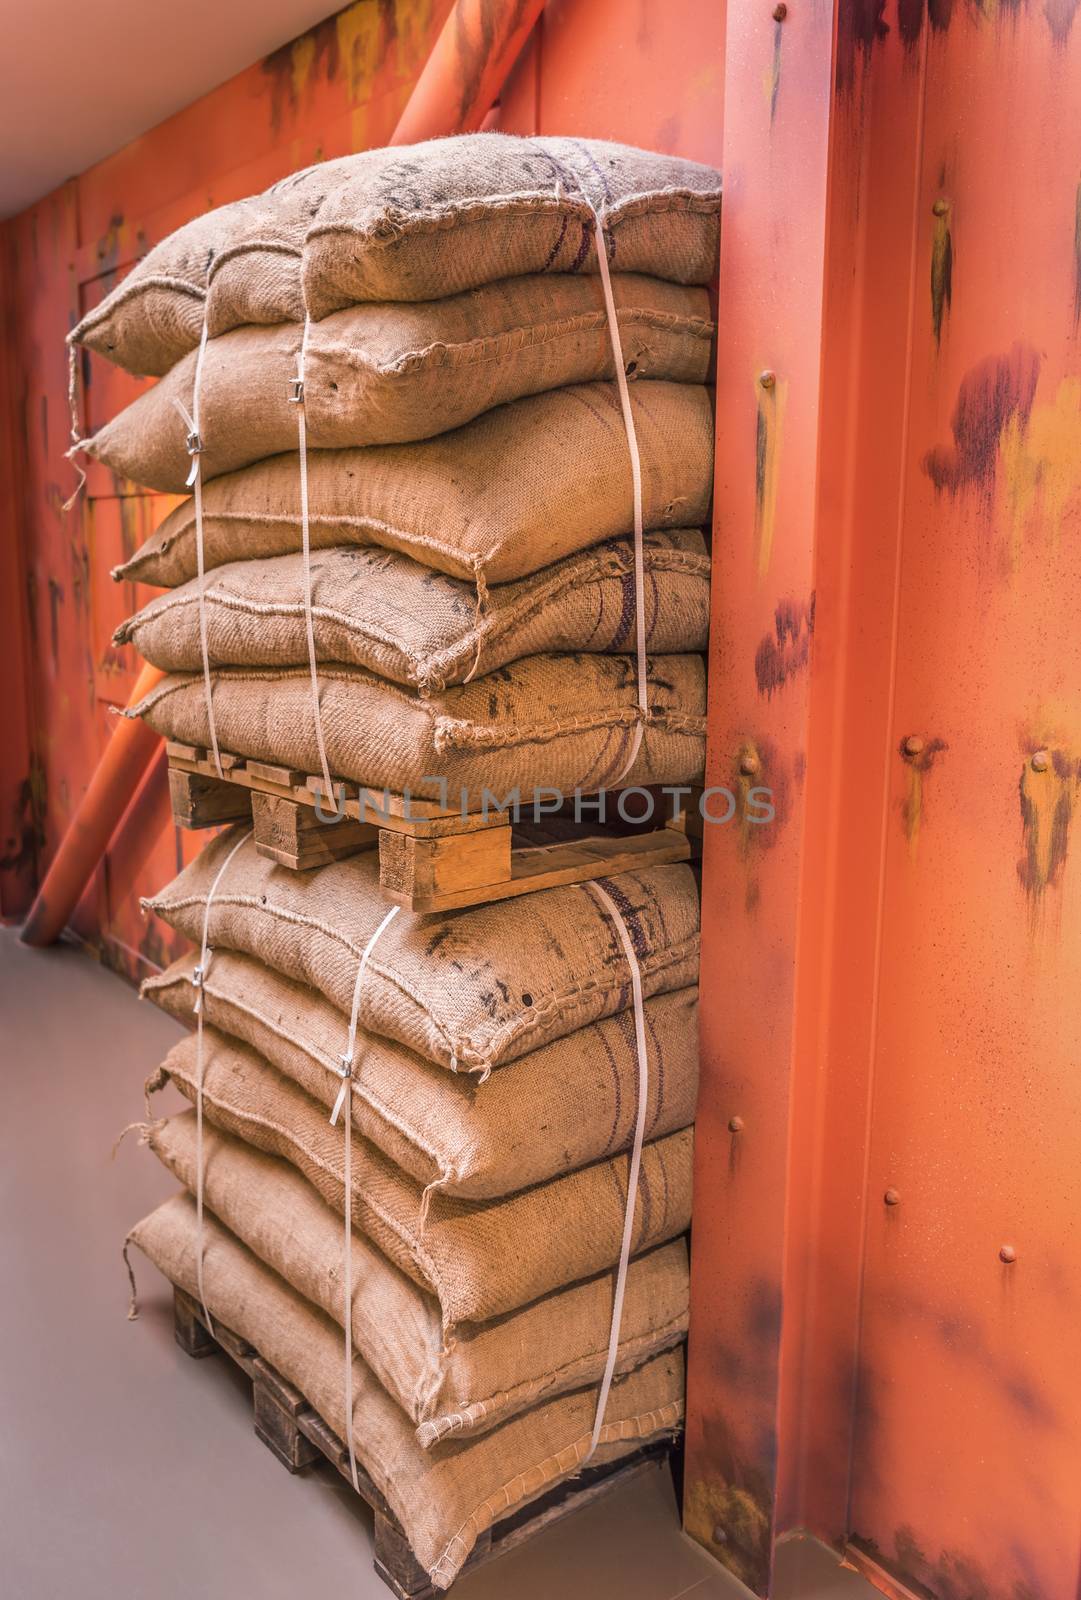 Pallets of merchandise bags stacked in storage by YesPhotographers